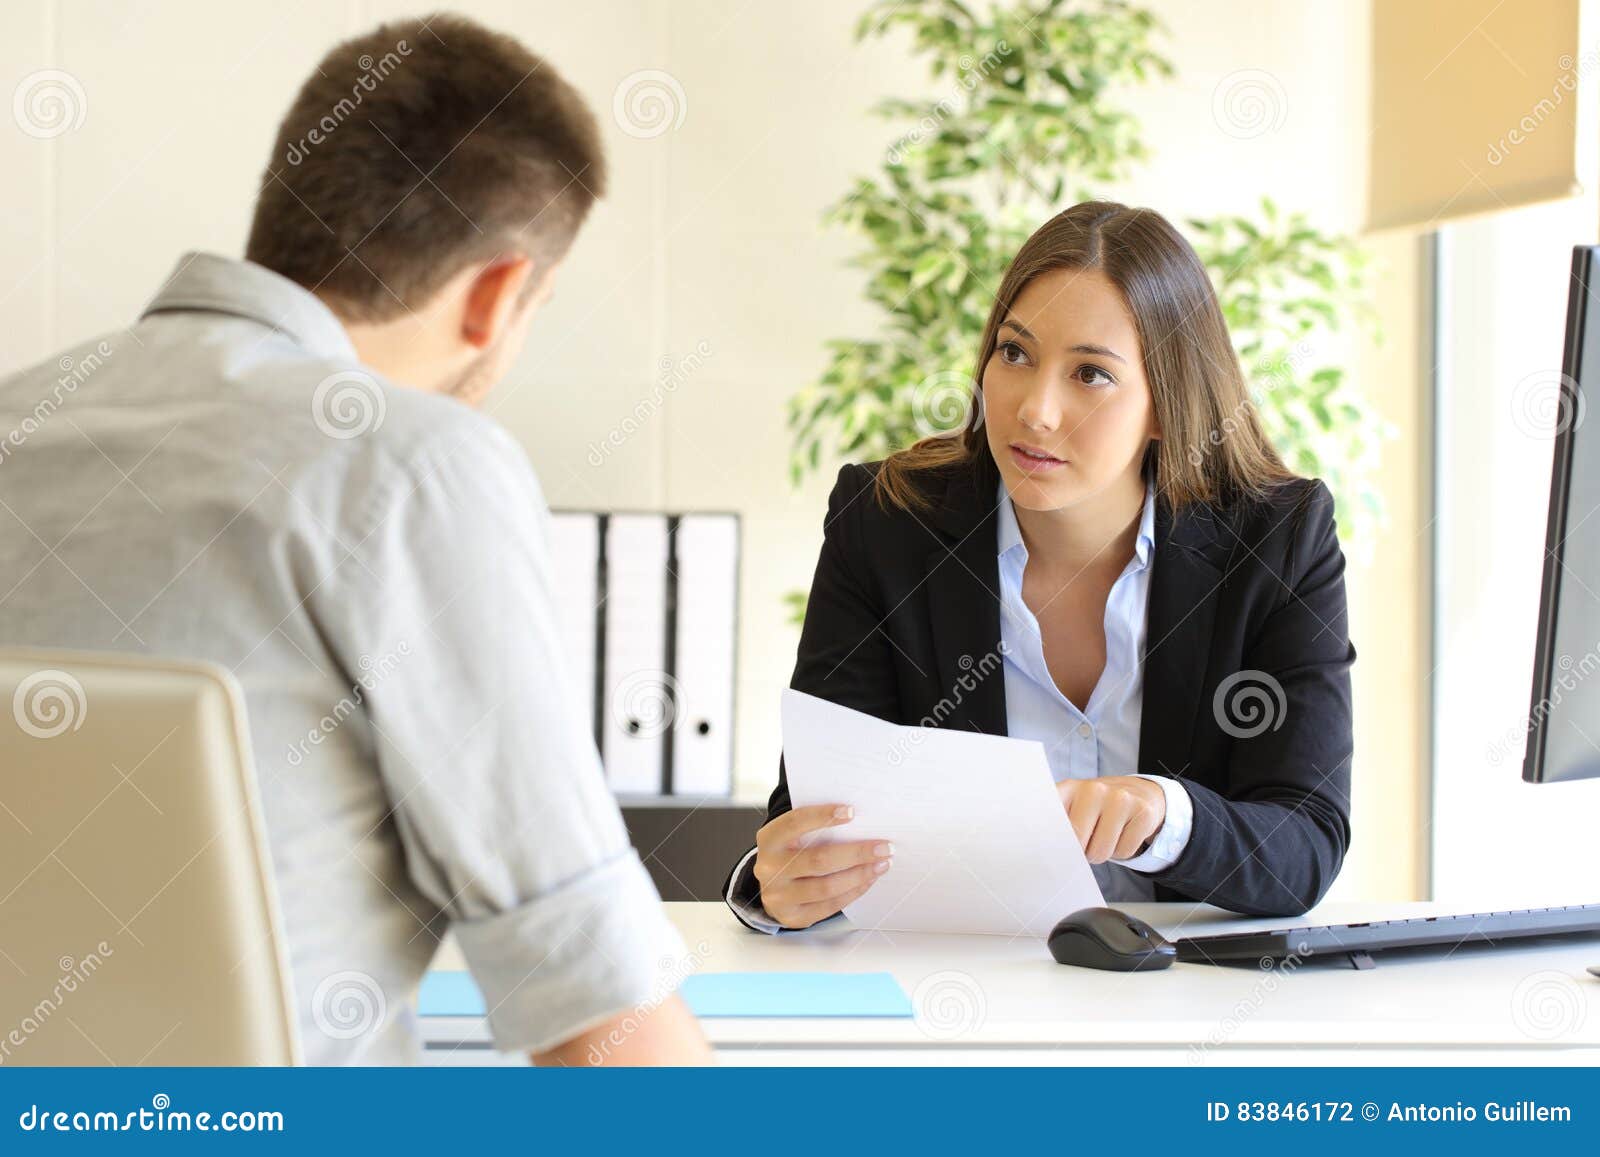 man searching job during an interview